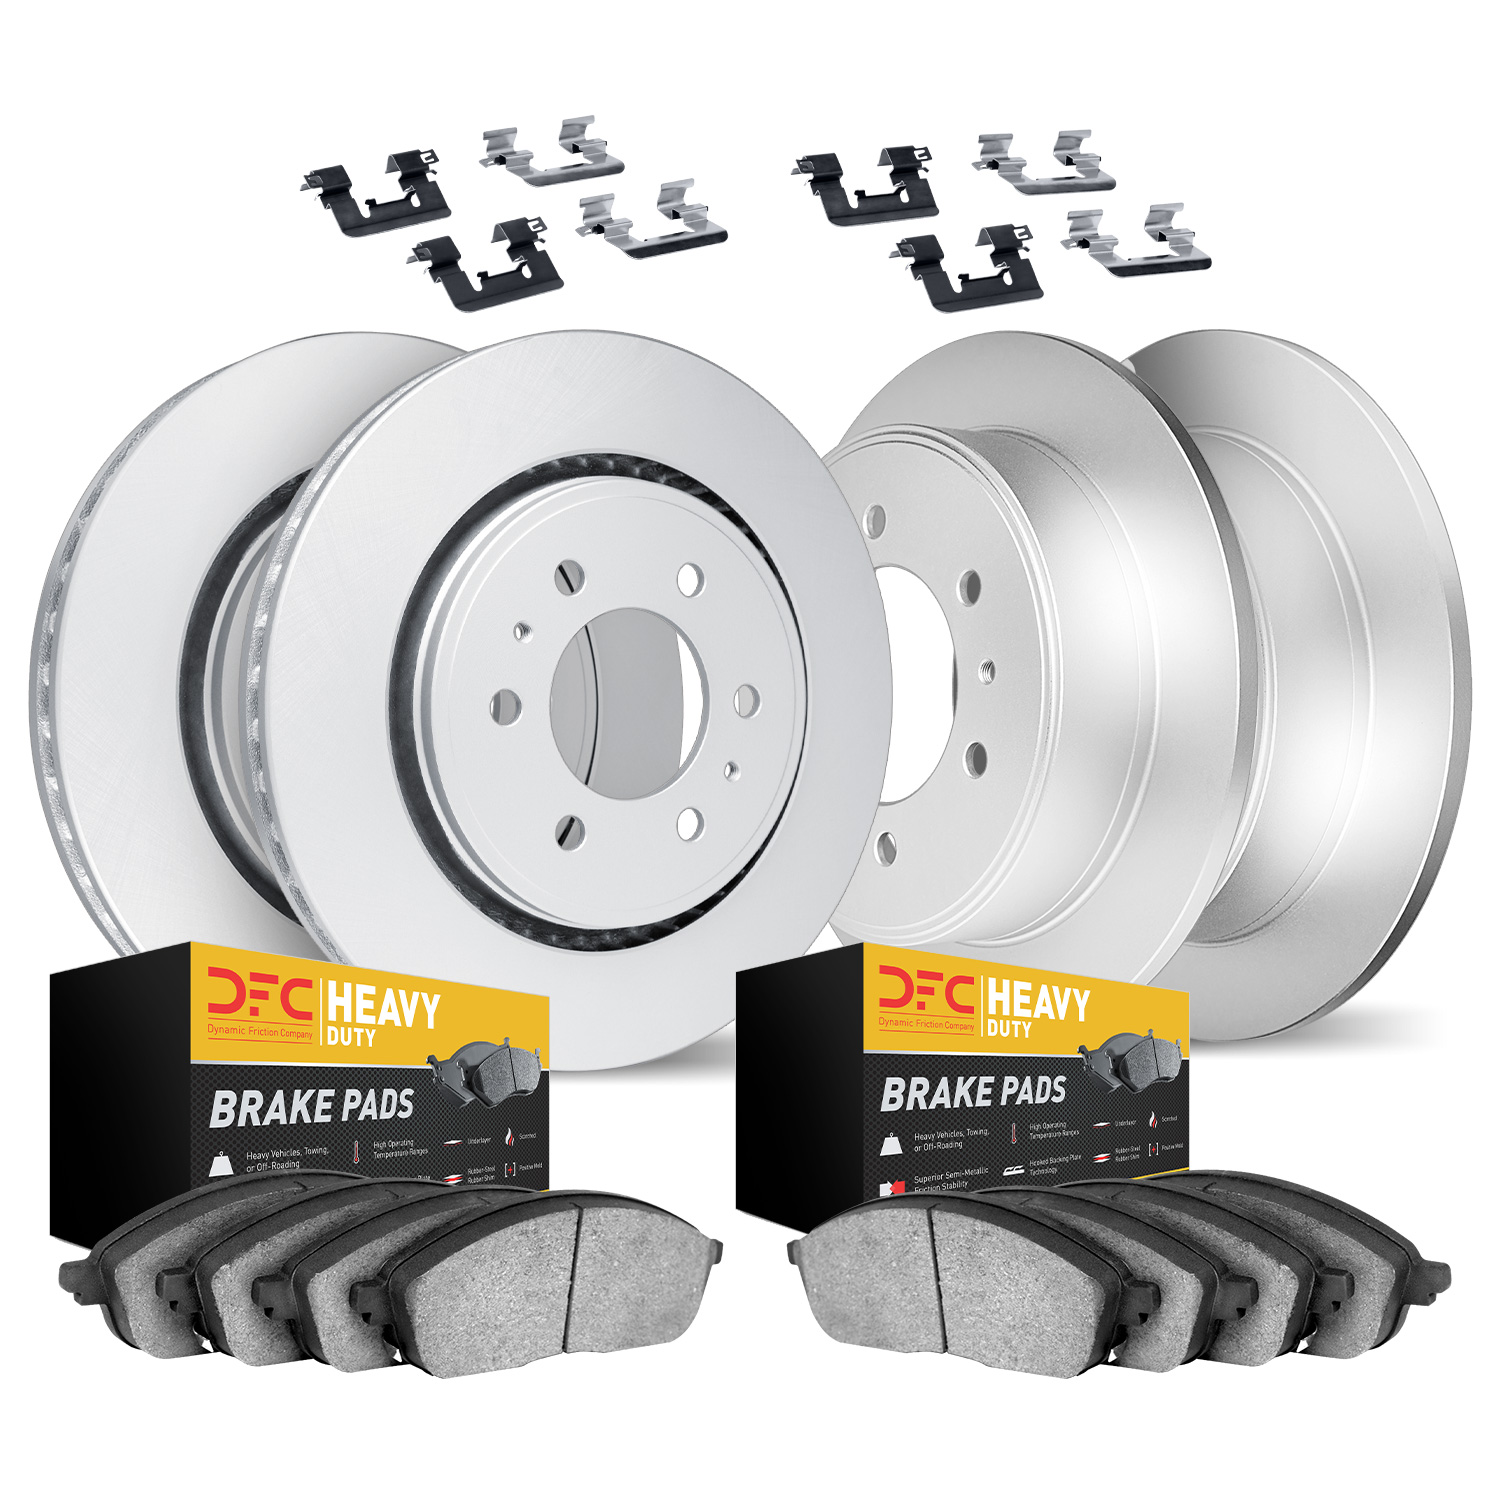 4214-40092 Geospec Brake Rotors w/Heavy-Duty Brake Pads & Hardware, Fits Select Multiple Makes/Models, Position: Front and Rear